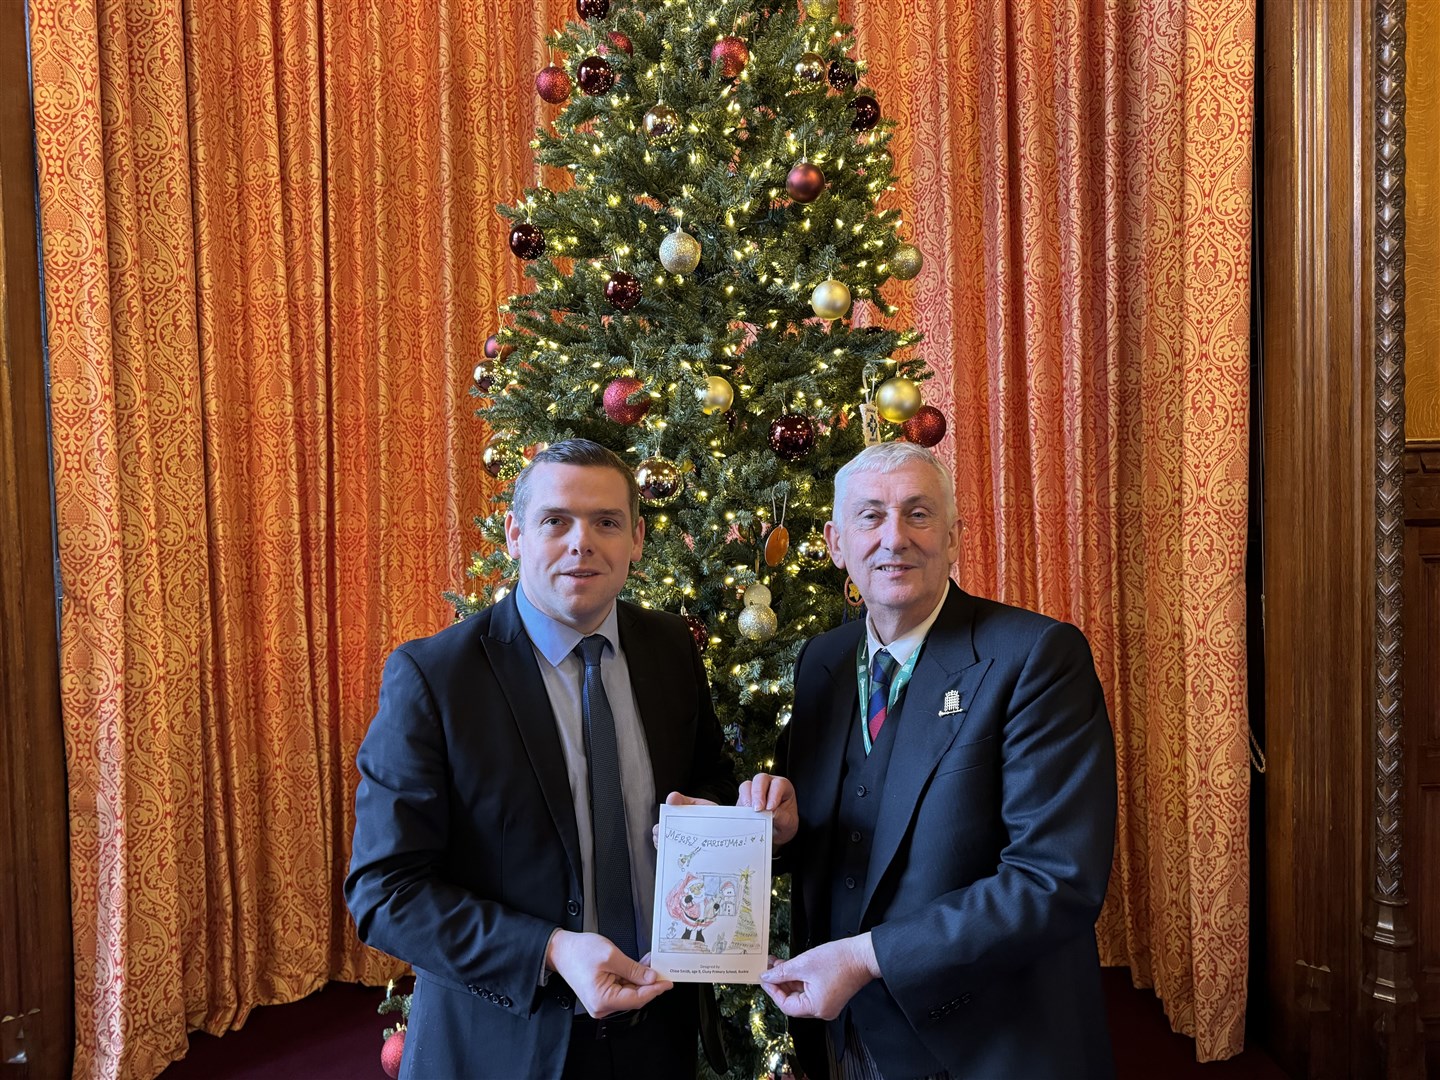 Speaker of the House of Commons Lindsay Hoyle with his copy of the card.